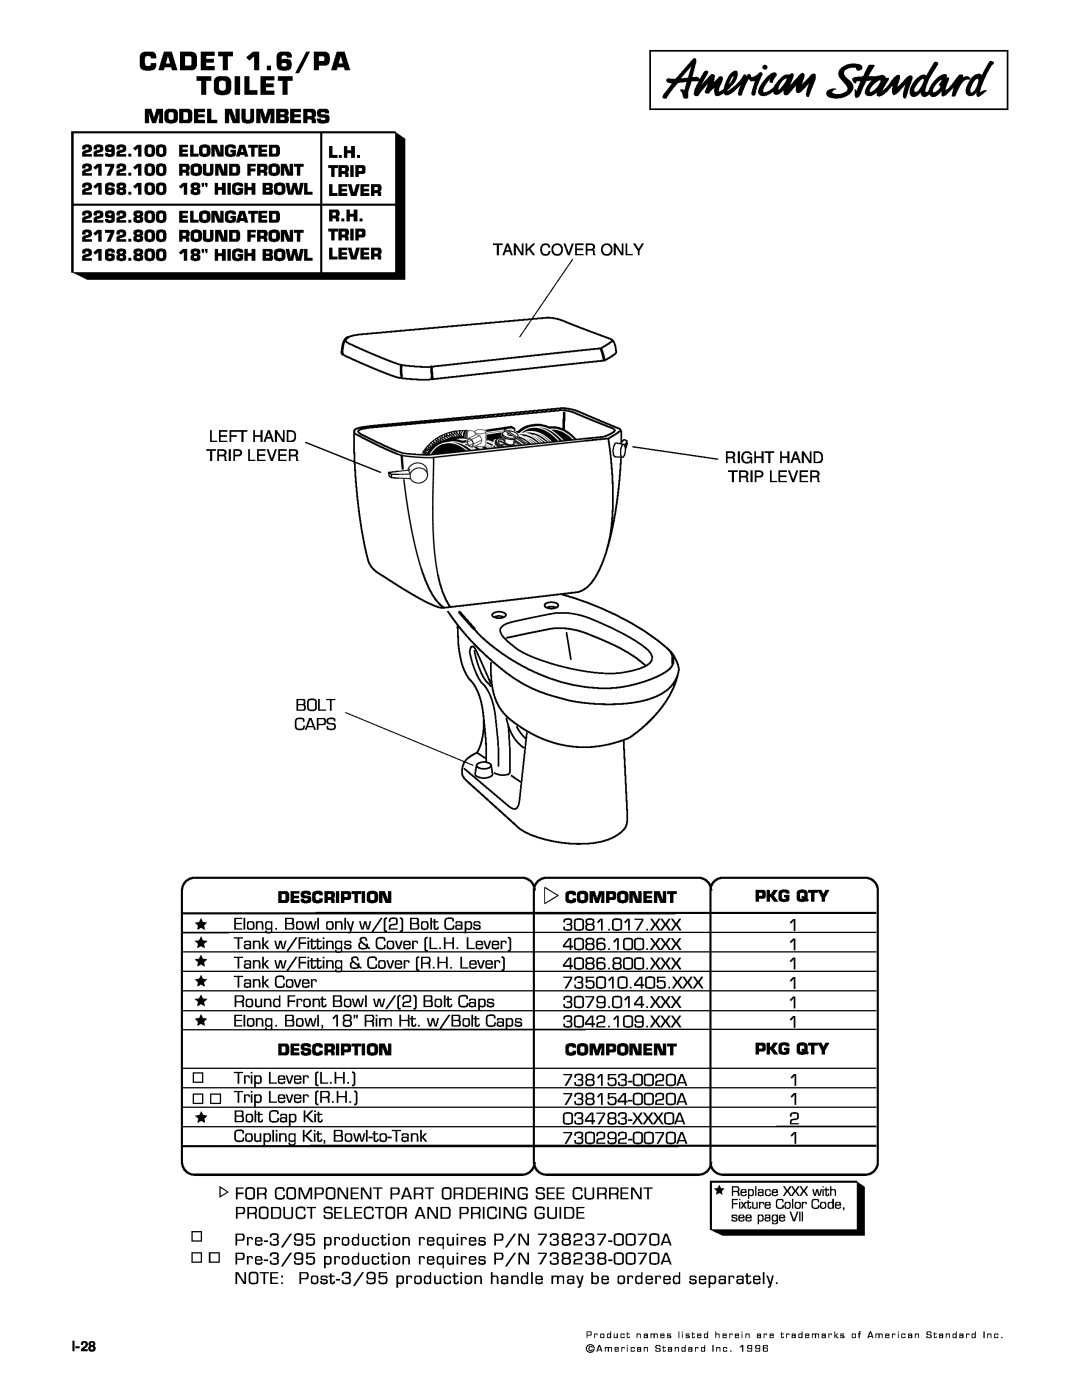 American Standard 2172.100, 2168.100, 2292.100, 738154-0020A, 738153-0020A manual CADET 1.6/PA TOILET, Model Numbers 